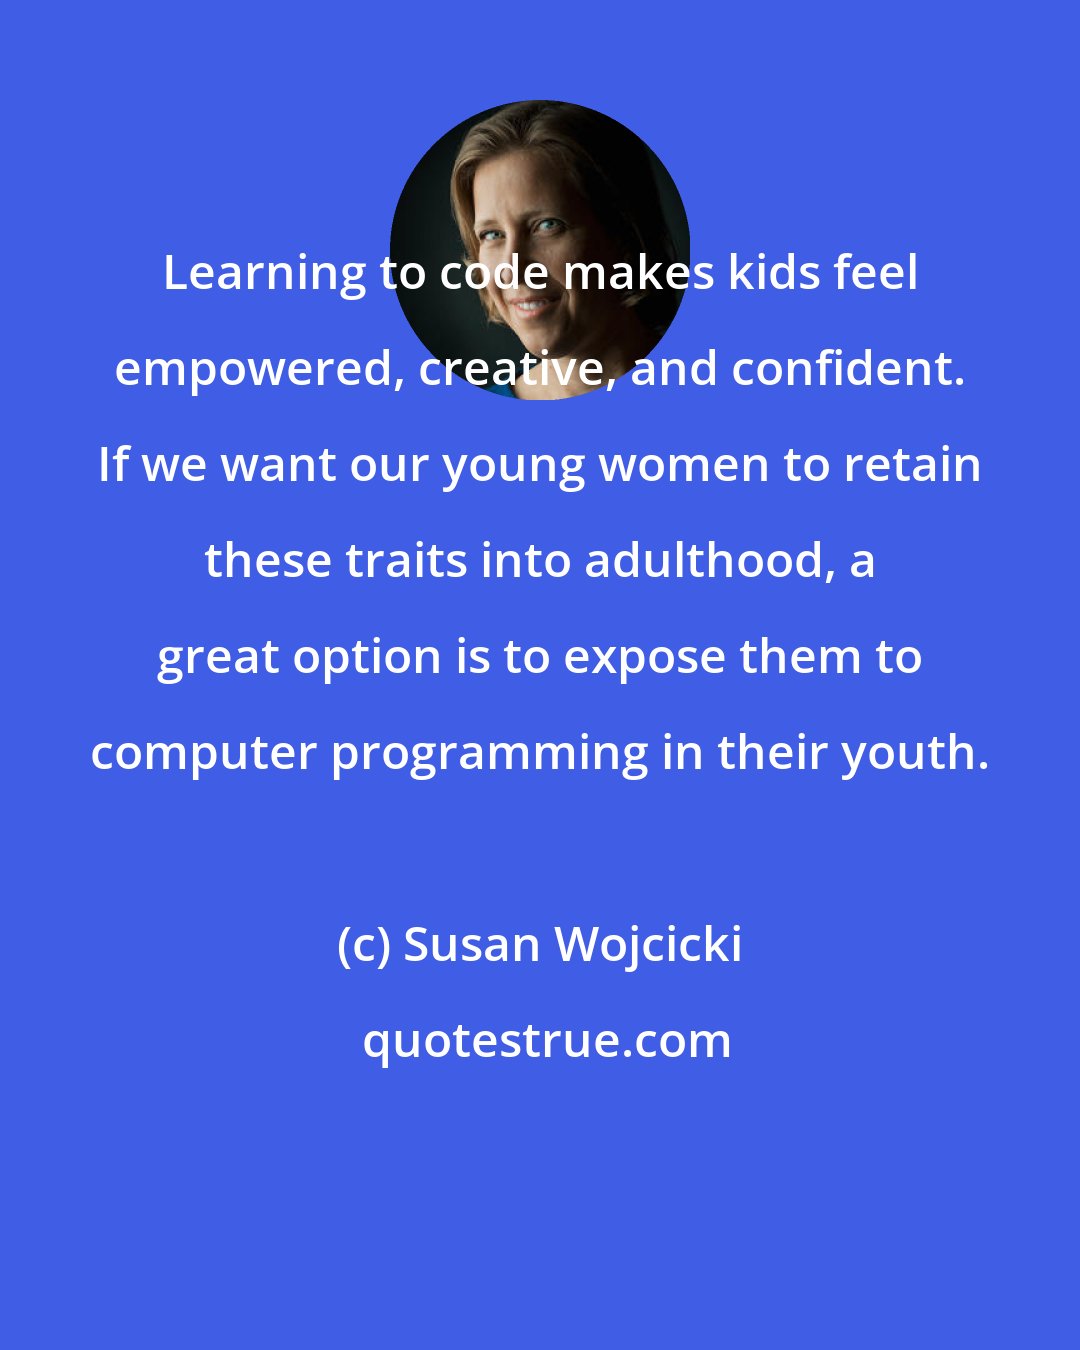 Susan Wojcicki: Learning to code makes kids feel empowered, creative, and confident. If we want our young women to retain these traits into adulthood, a great option is to expose them to computer programming in their youth.